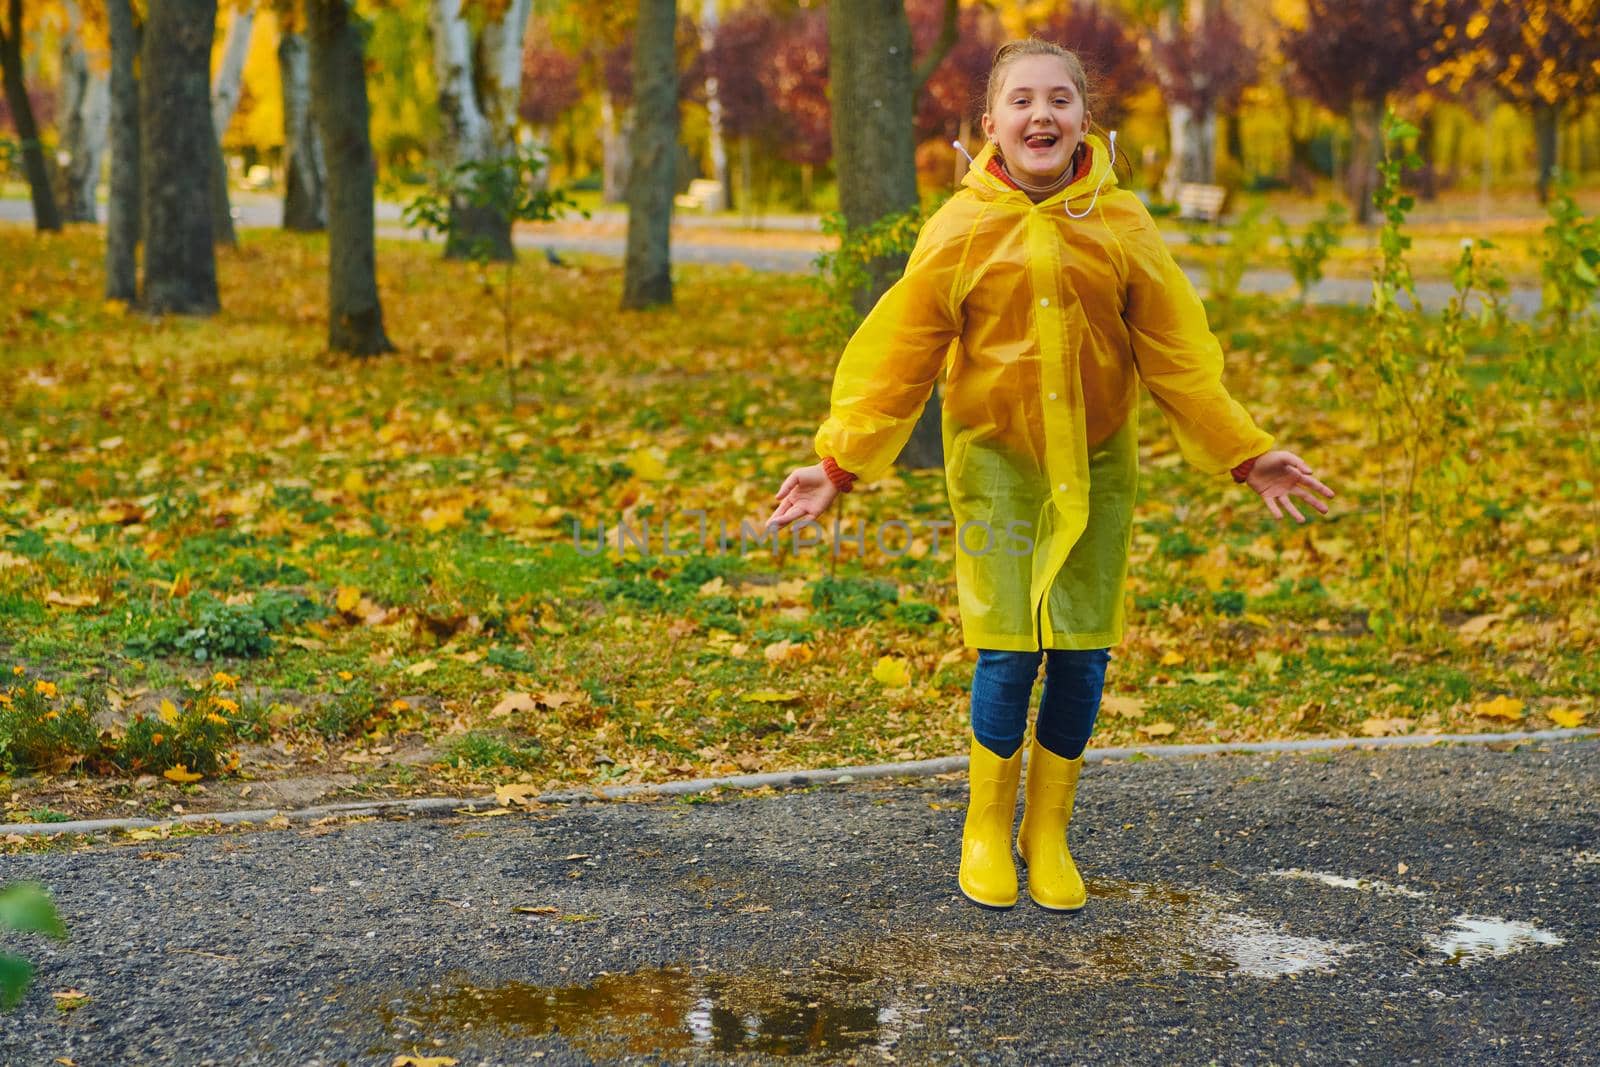 A happy girl in a yellow raincoat and rubber boots on an autumn walk. by InnaVlasova